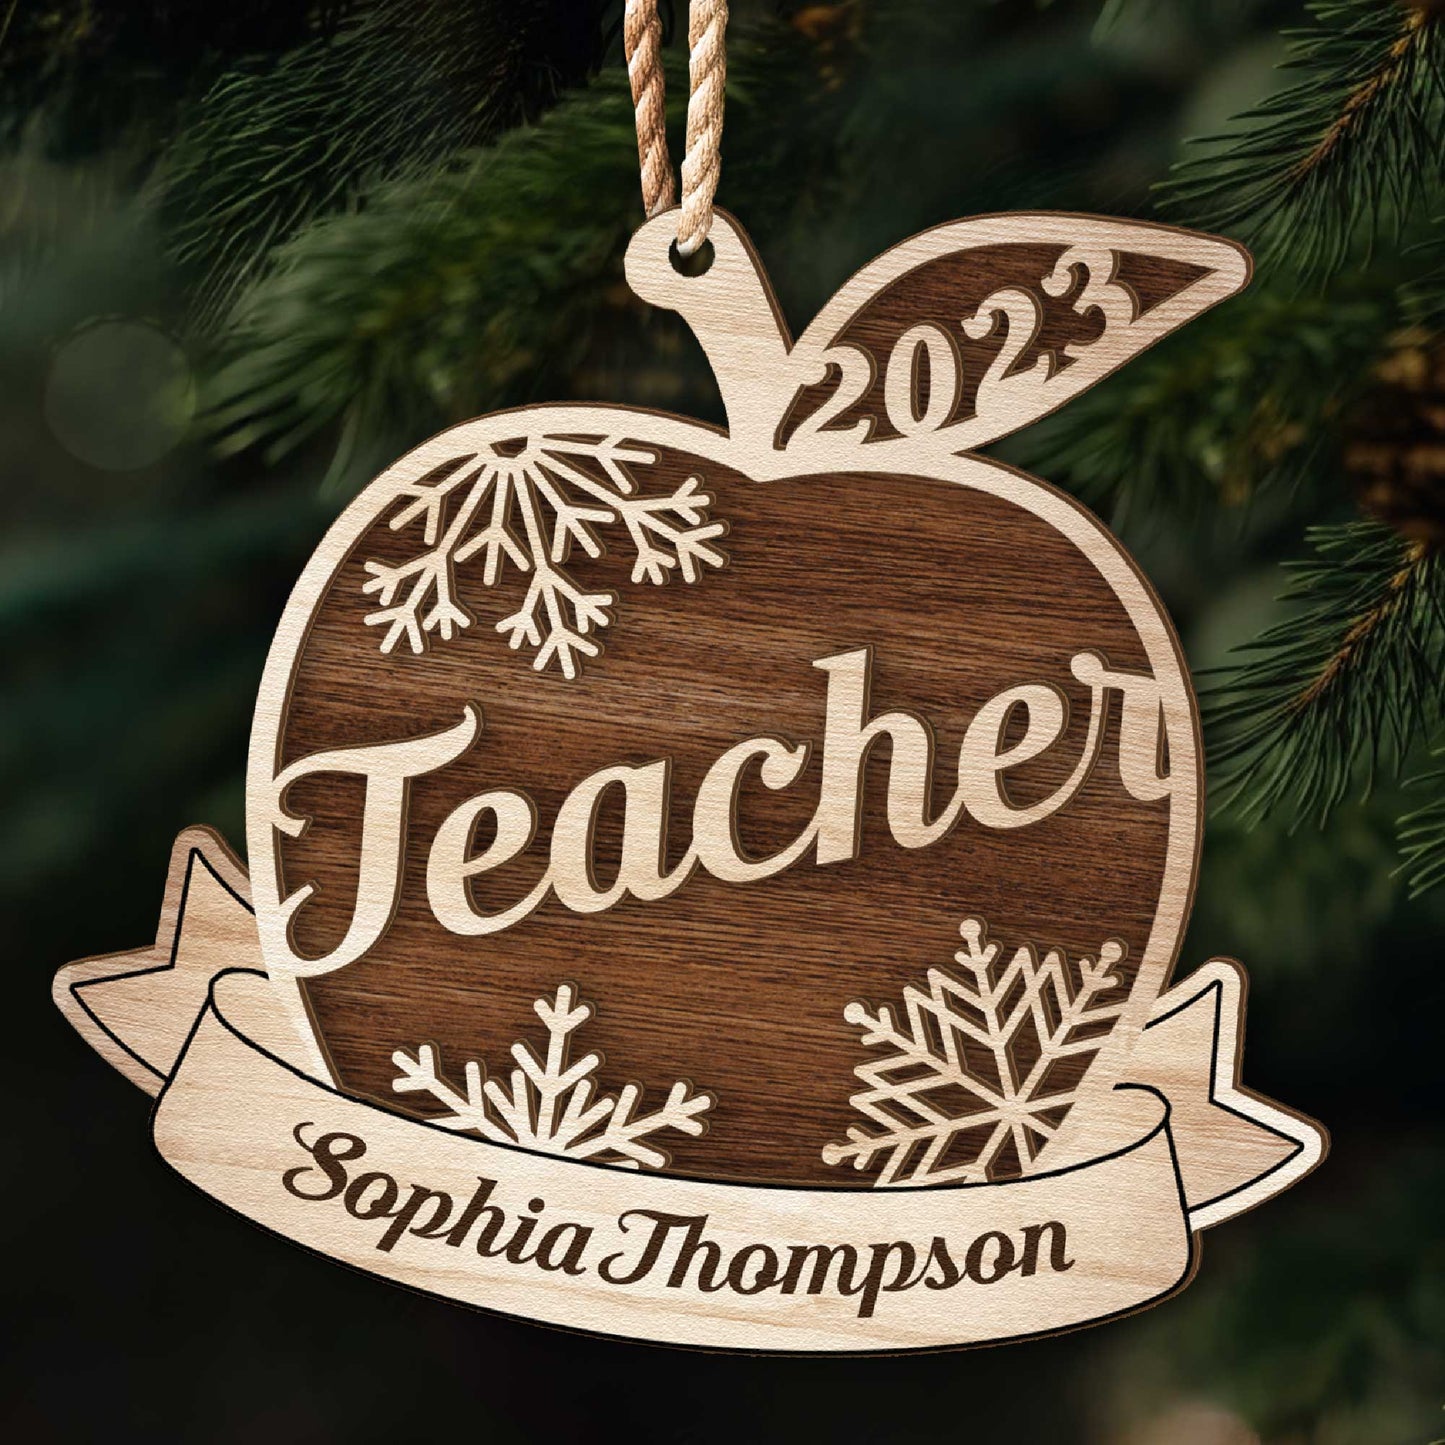 Teacher Appreciation - Personalized Wooden Ornament With Bow